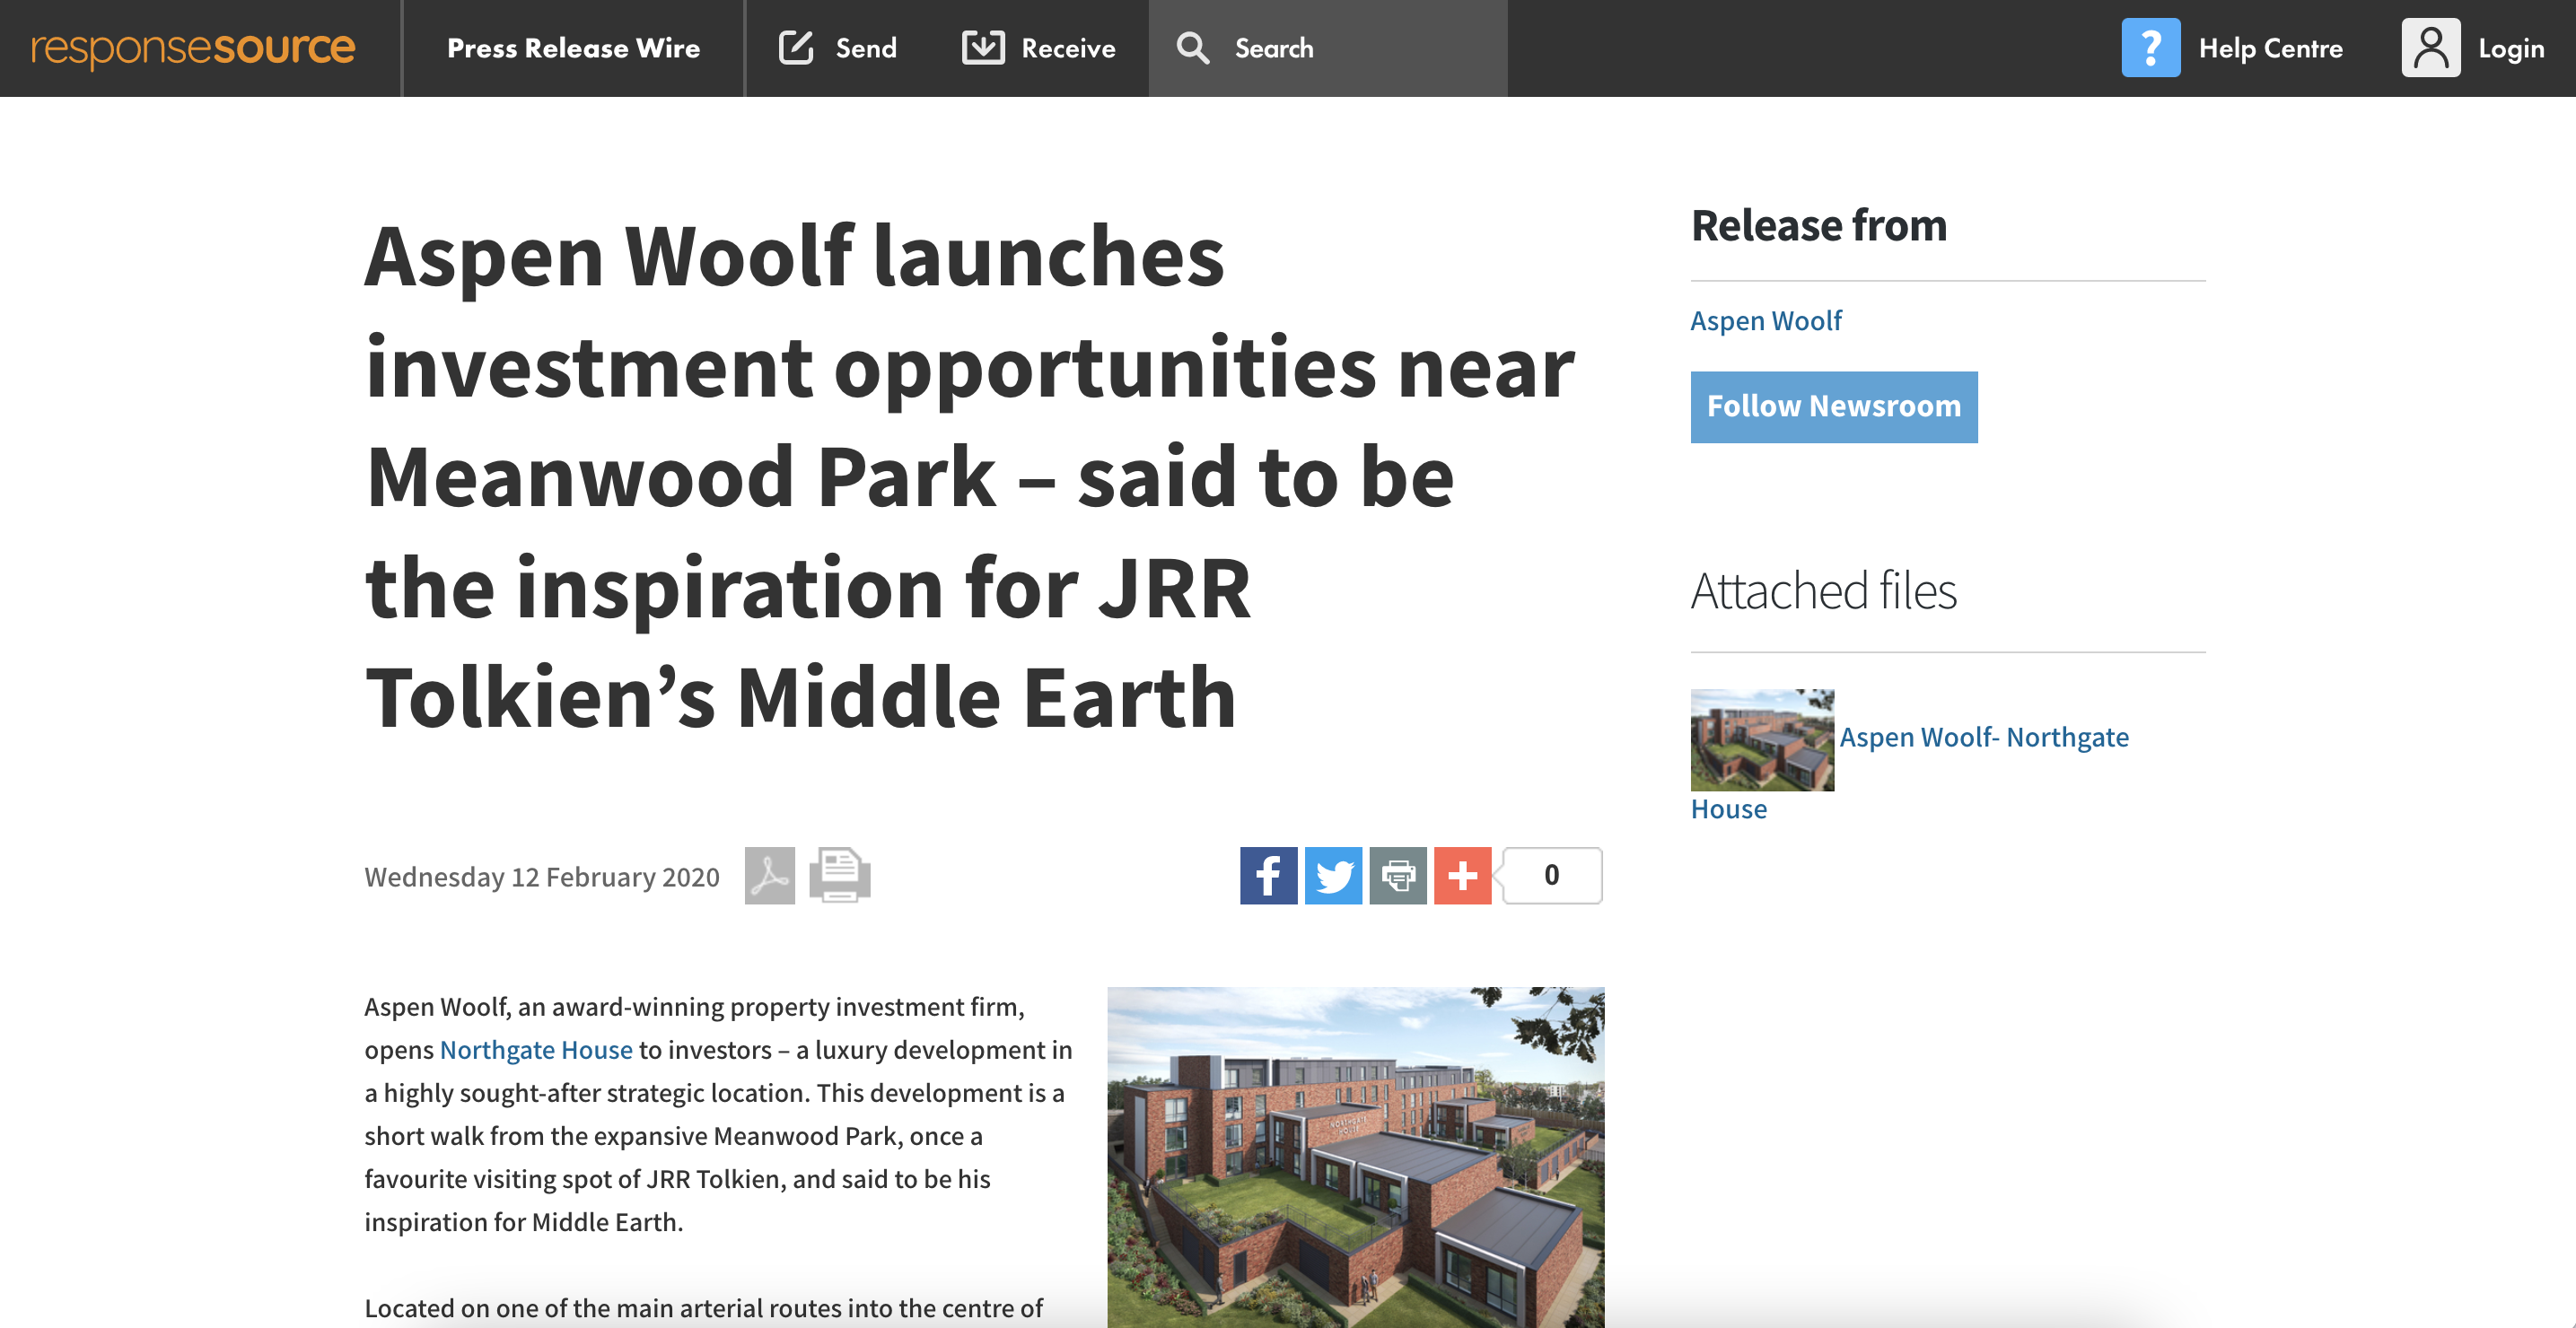 Aspen Woolf launches investment opportunities near Meanwood Park – said to be the inspiration for JRR Tolkien’s Middle Earth